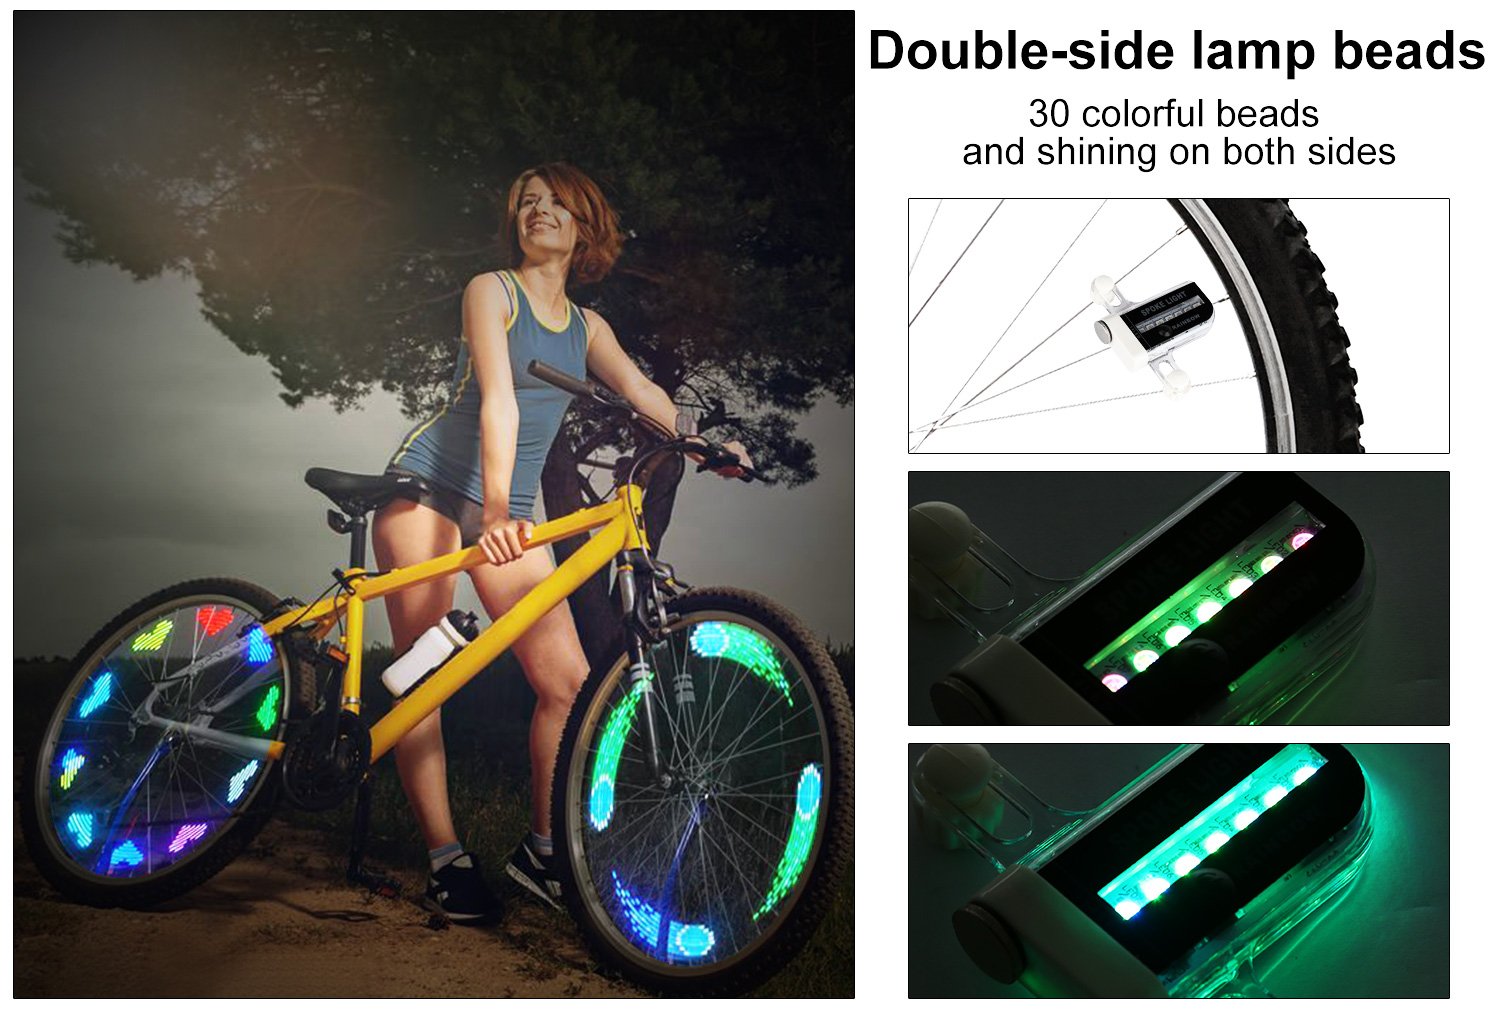 Rottay Bike Wheel Lights, Bicycle Wheel Lights Waterproof RGB Ultra Bright Spoke Lights 14-LED 30pcs Changes Patterns -Safety Cool Bike Tire Accessories Kids Adults-Visible from All Angle